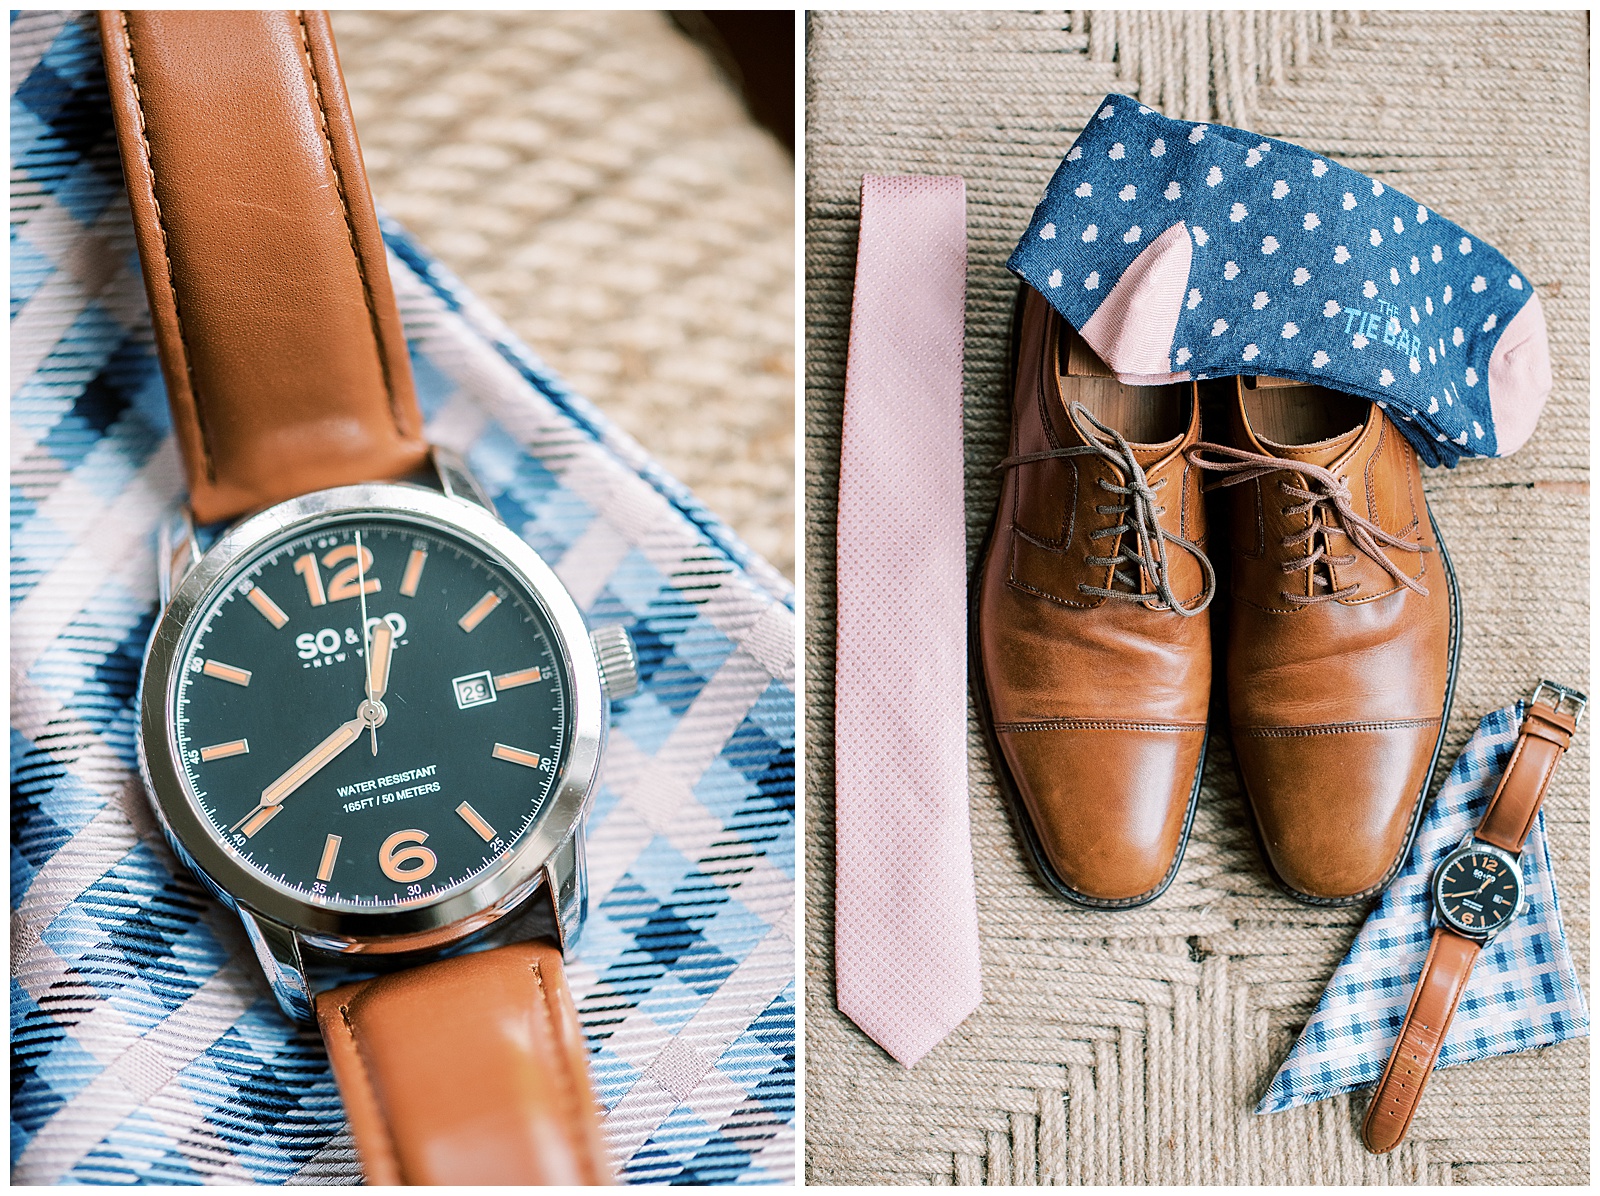 groom's leather watch and shoes and pink tie detail shots